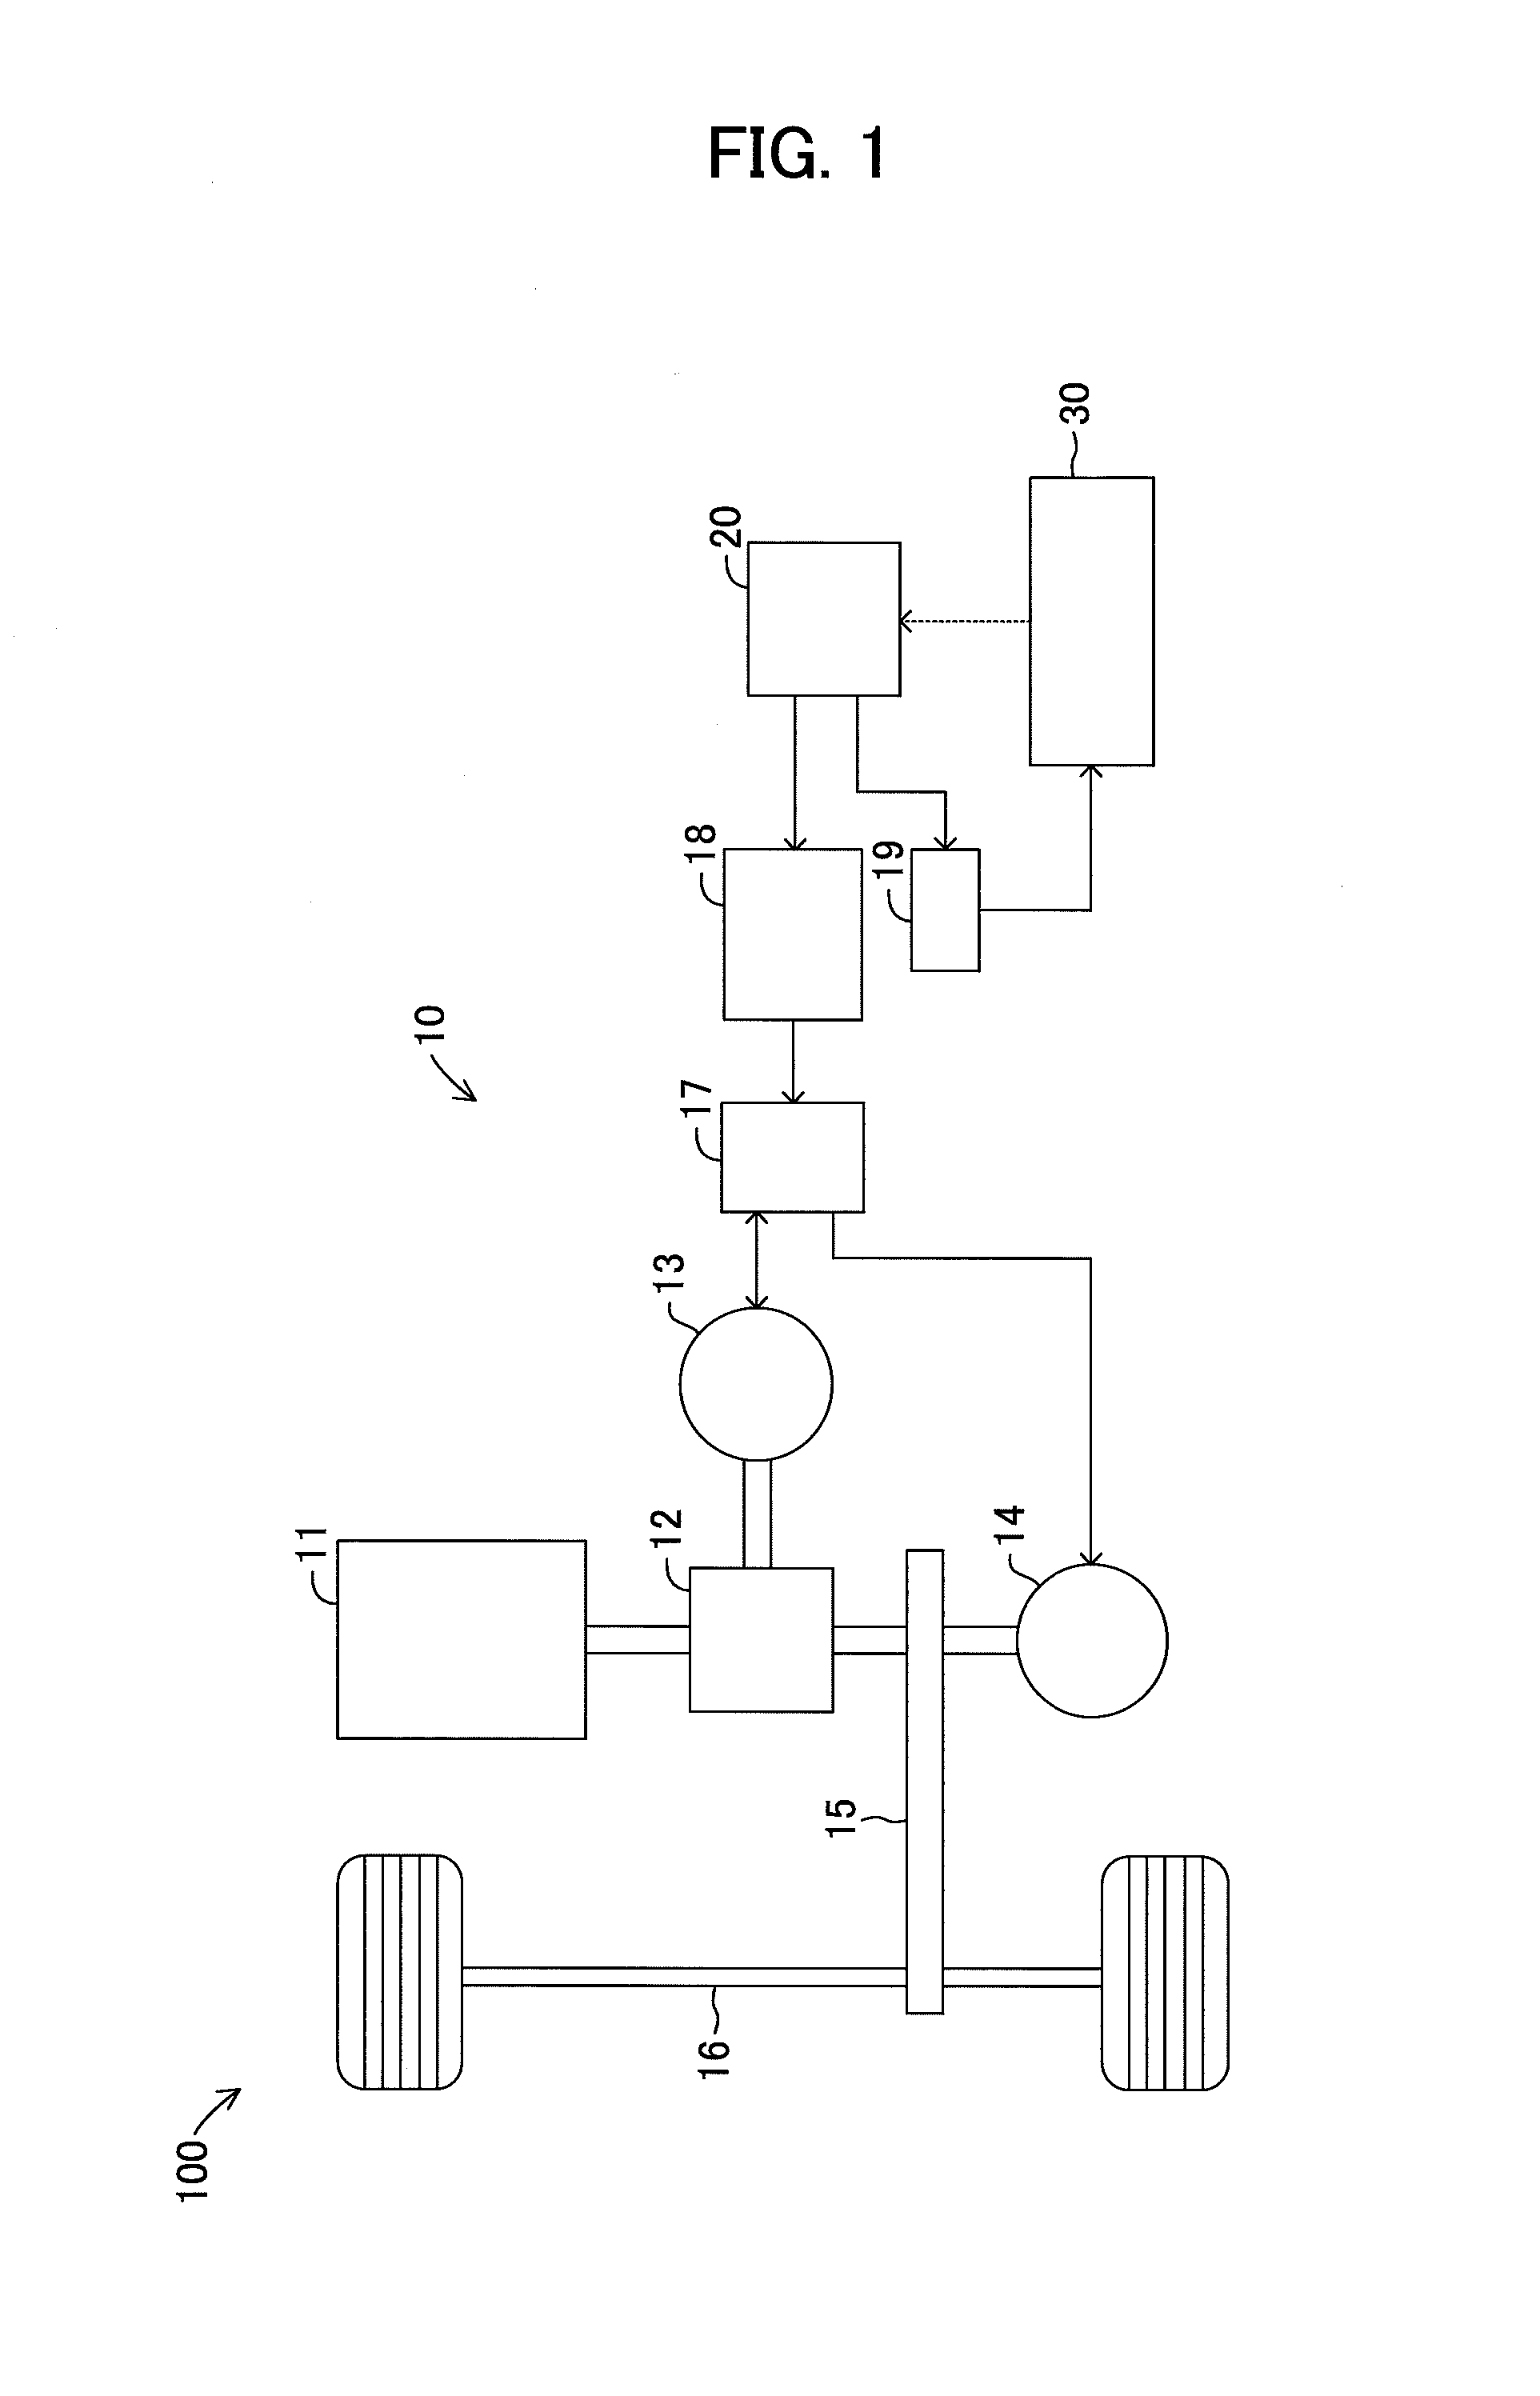 Charge control device using an in-vehicle solar cell